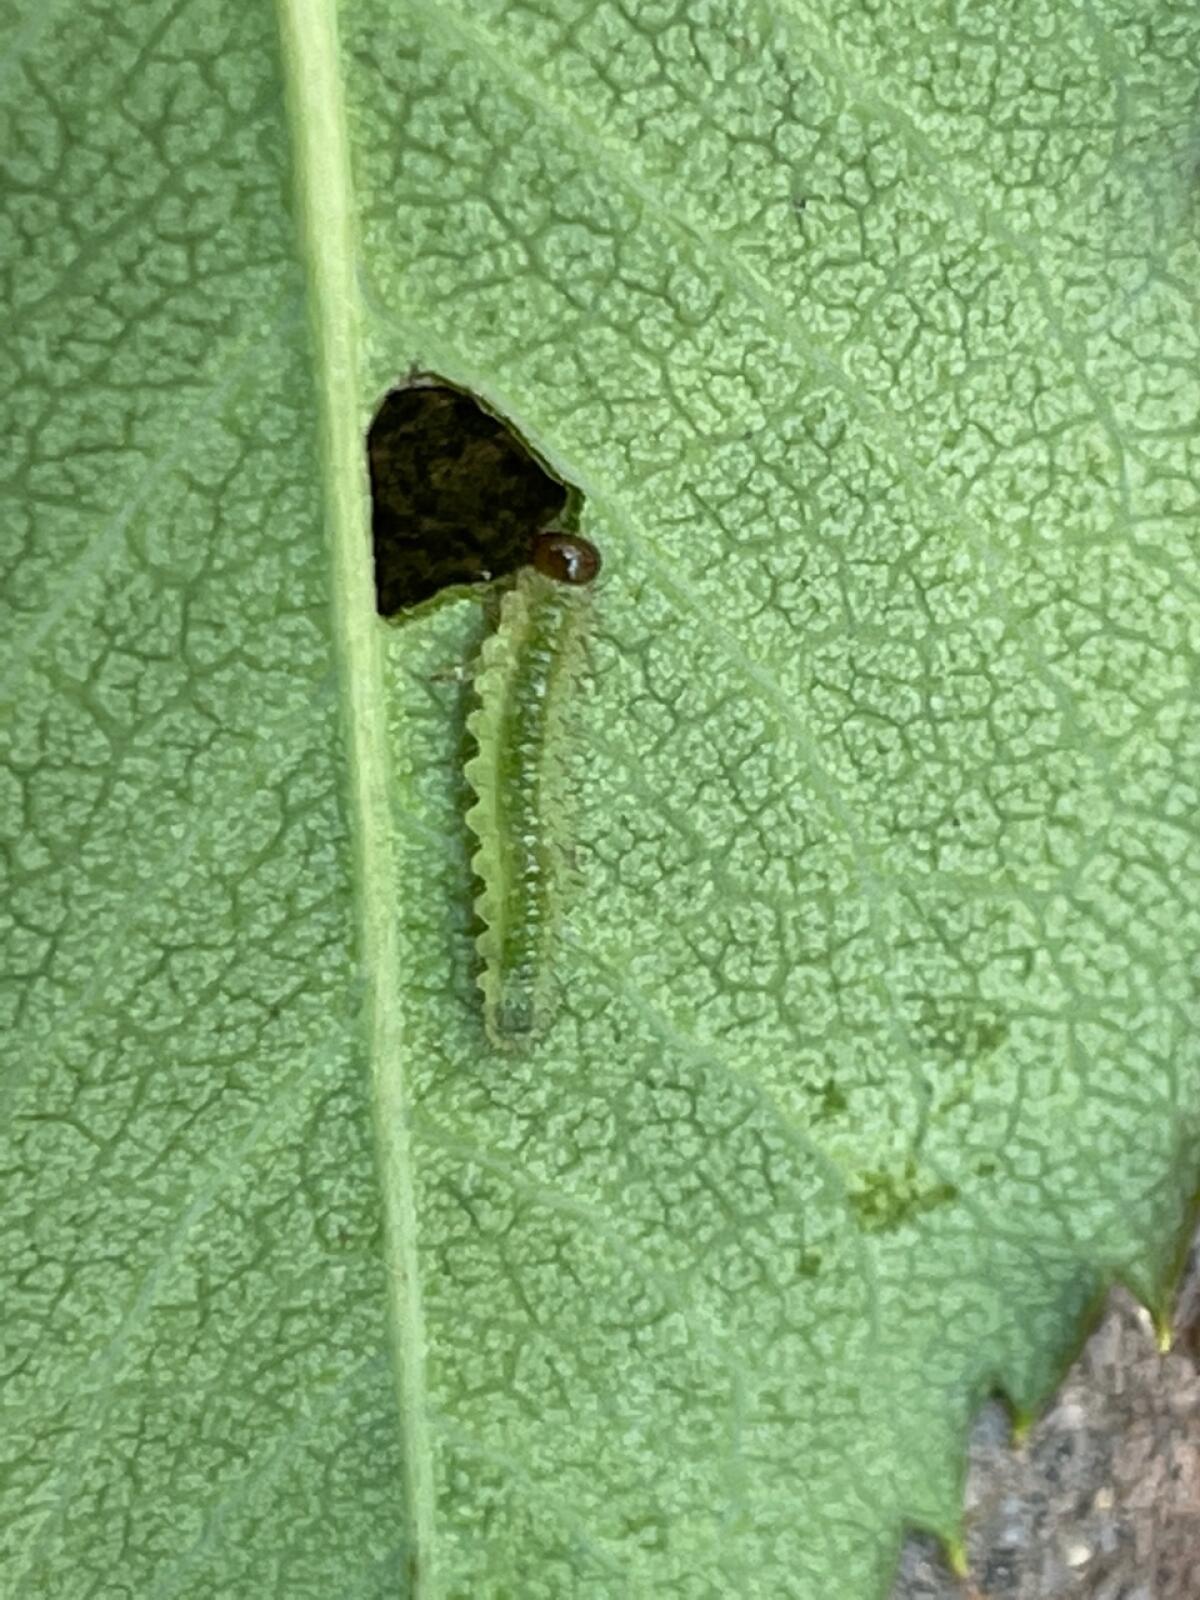 Bristly rose slugs are the larvae of the sawfly. They are pale green or yellowish green with a brown head.